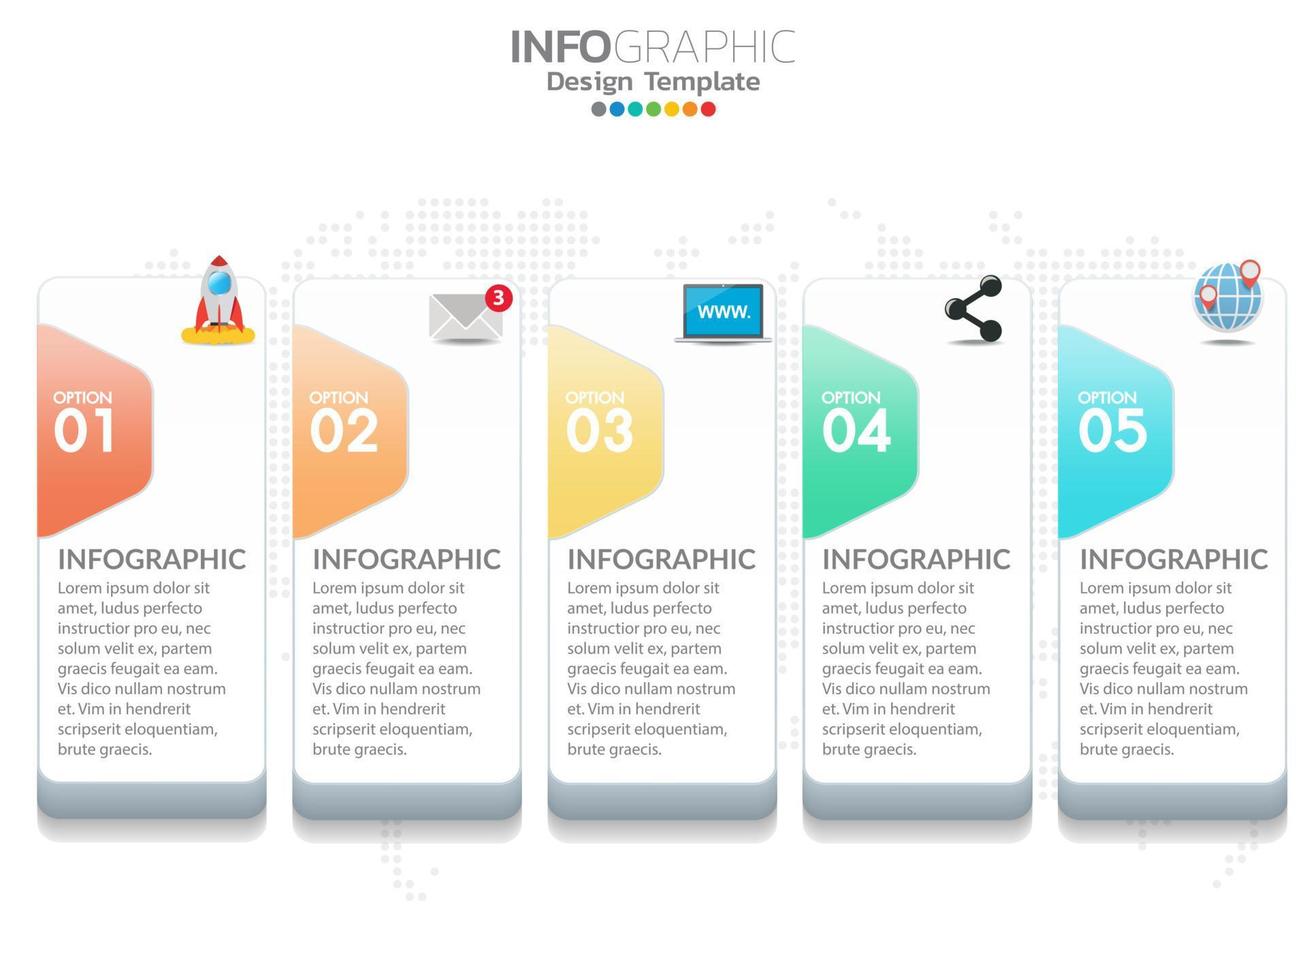 Business timeline infographic 3d style options banner. vector